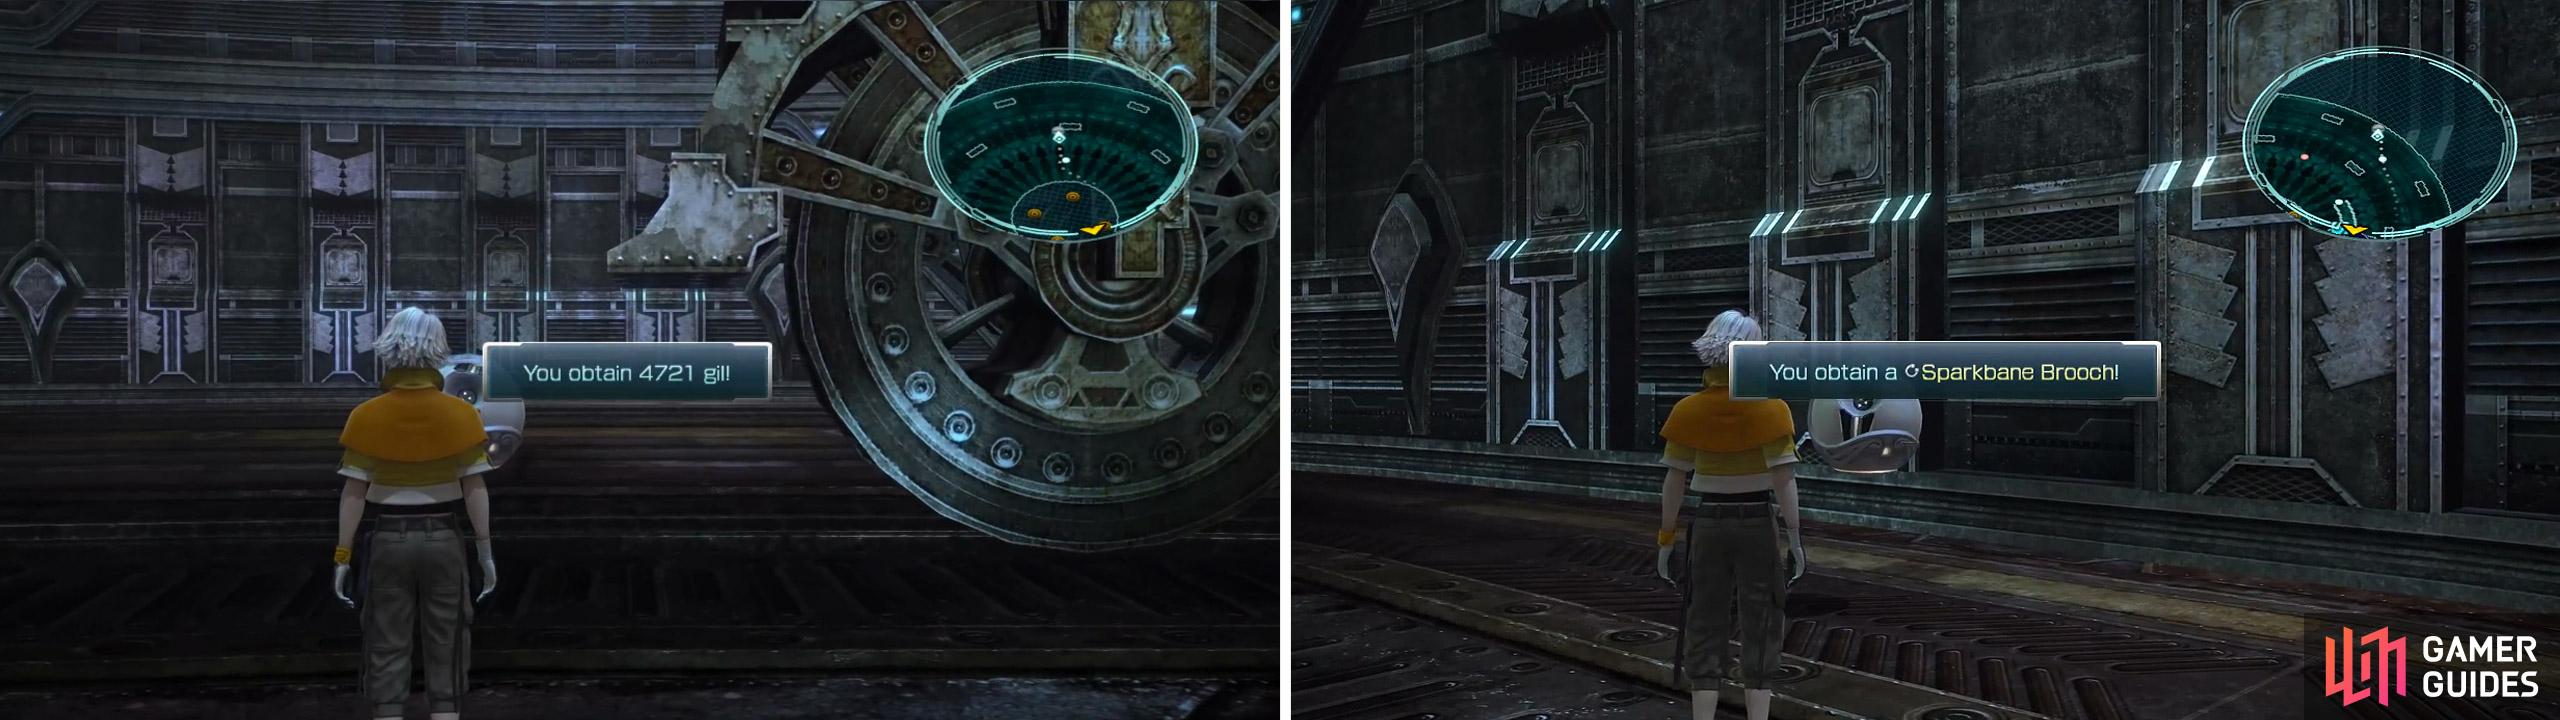 4,721 Gil (left) and Sparkbane Brooch (right) locations.